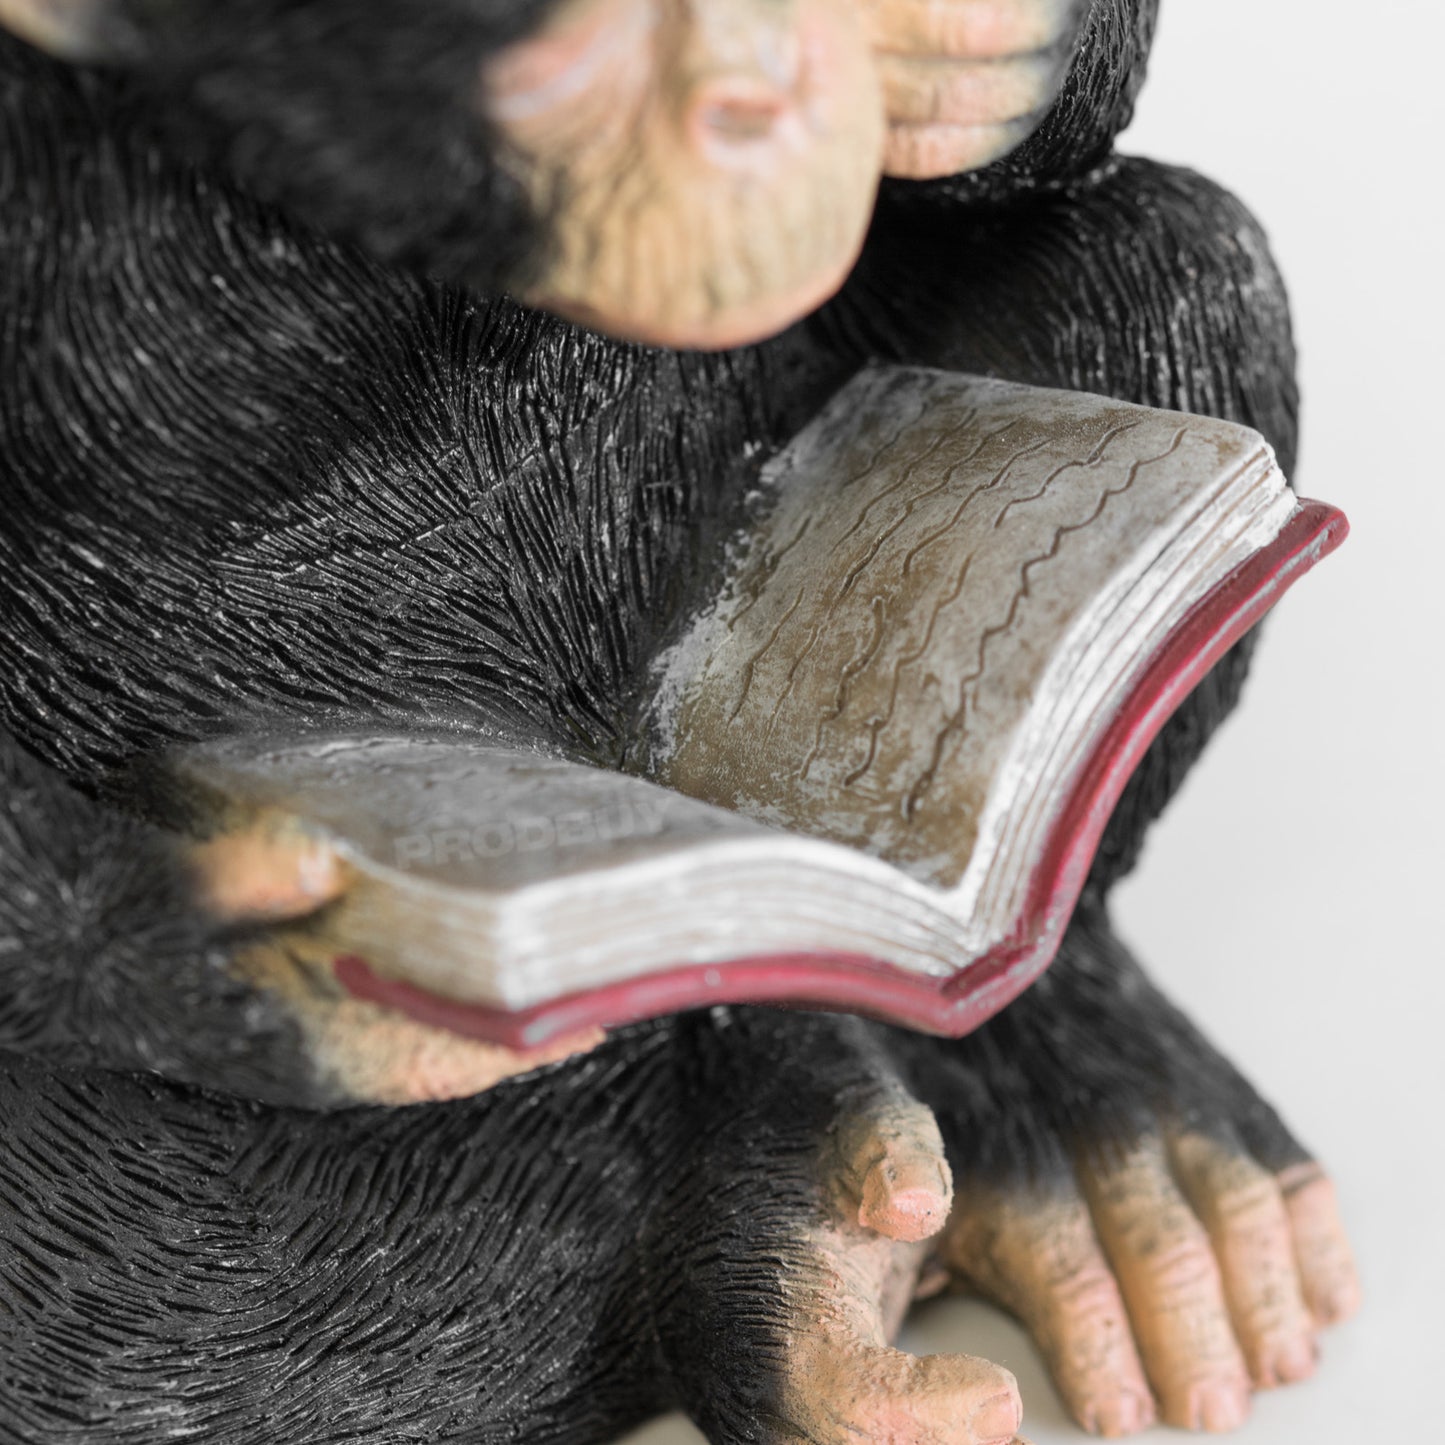 Pair of Novelty Reading Monkey Bookends